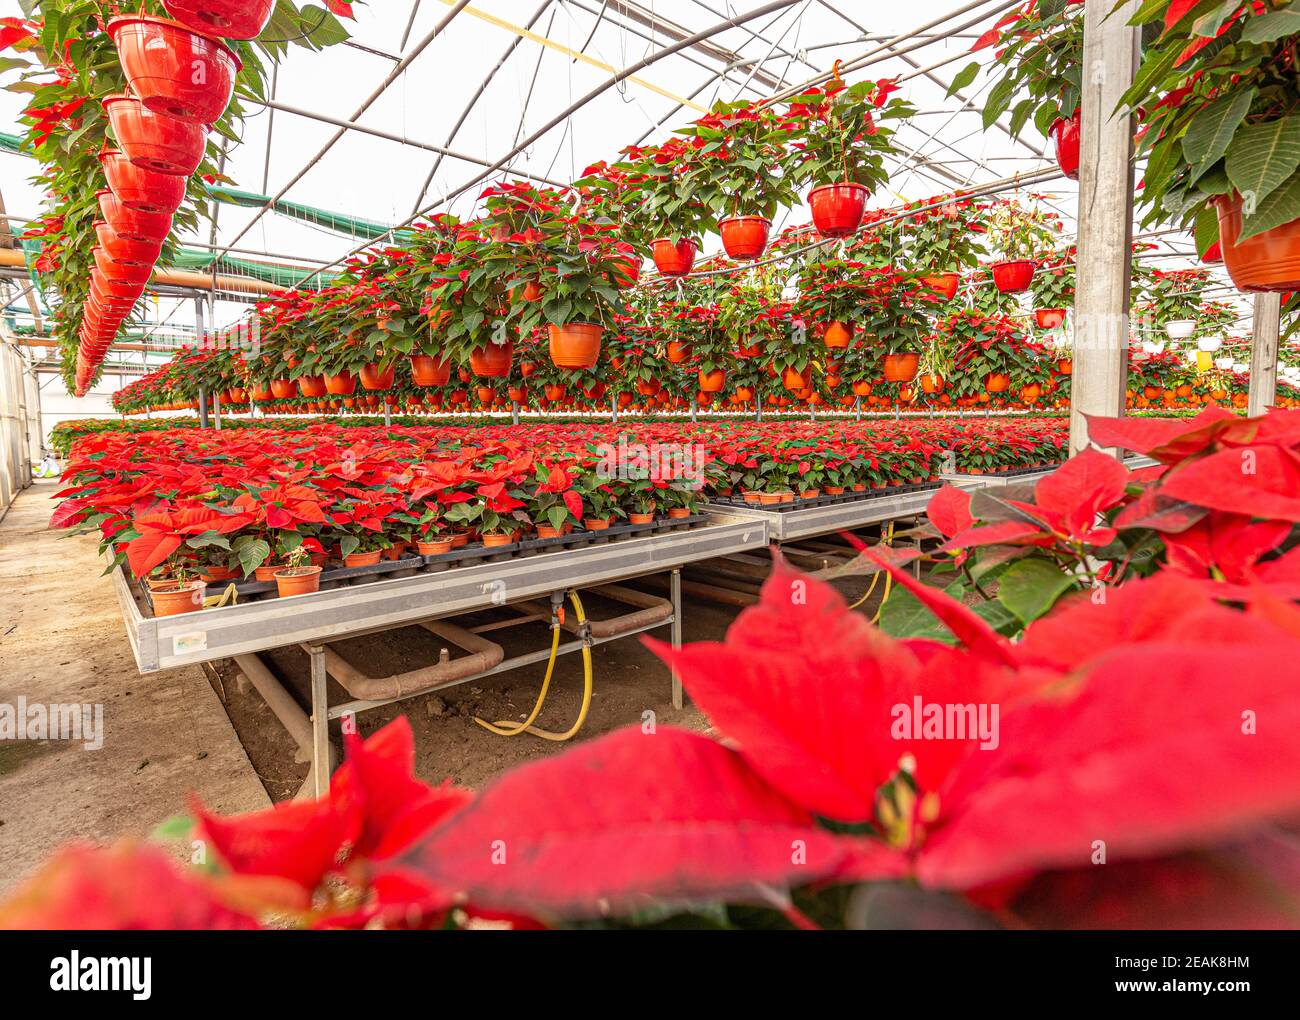 Poinsettia growing in pots Stock Photo